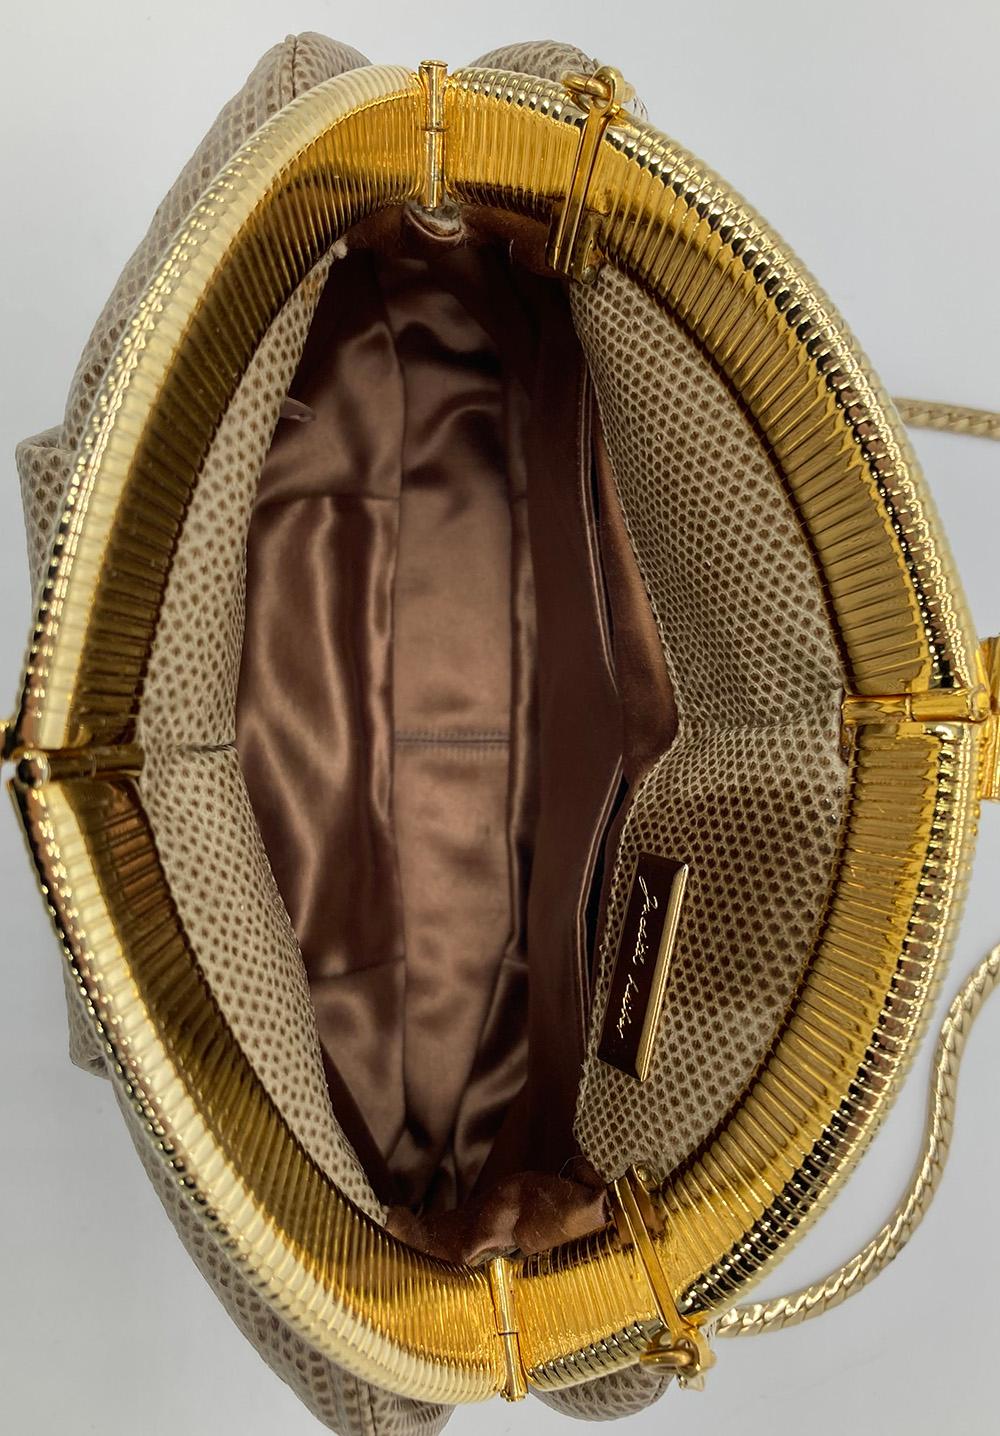 Vintage Judith Leiber Tan Lizard Clutch In Excellent Condition For Sale In Philadelphia, PA